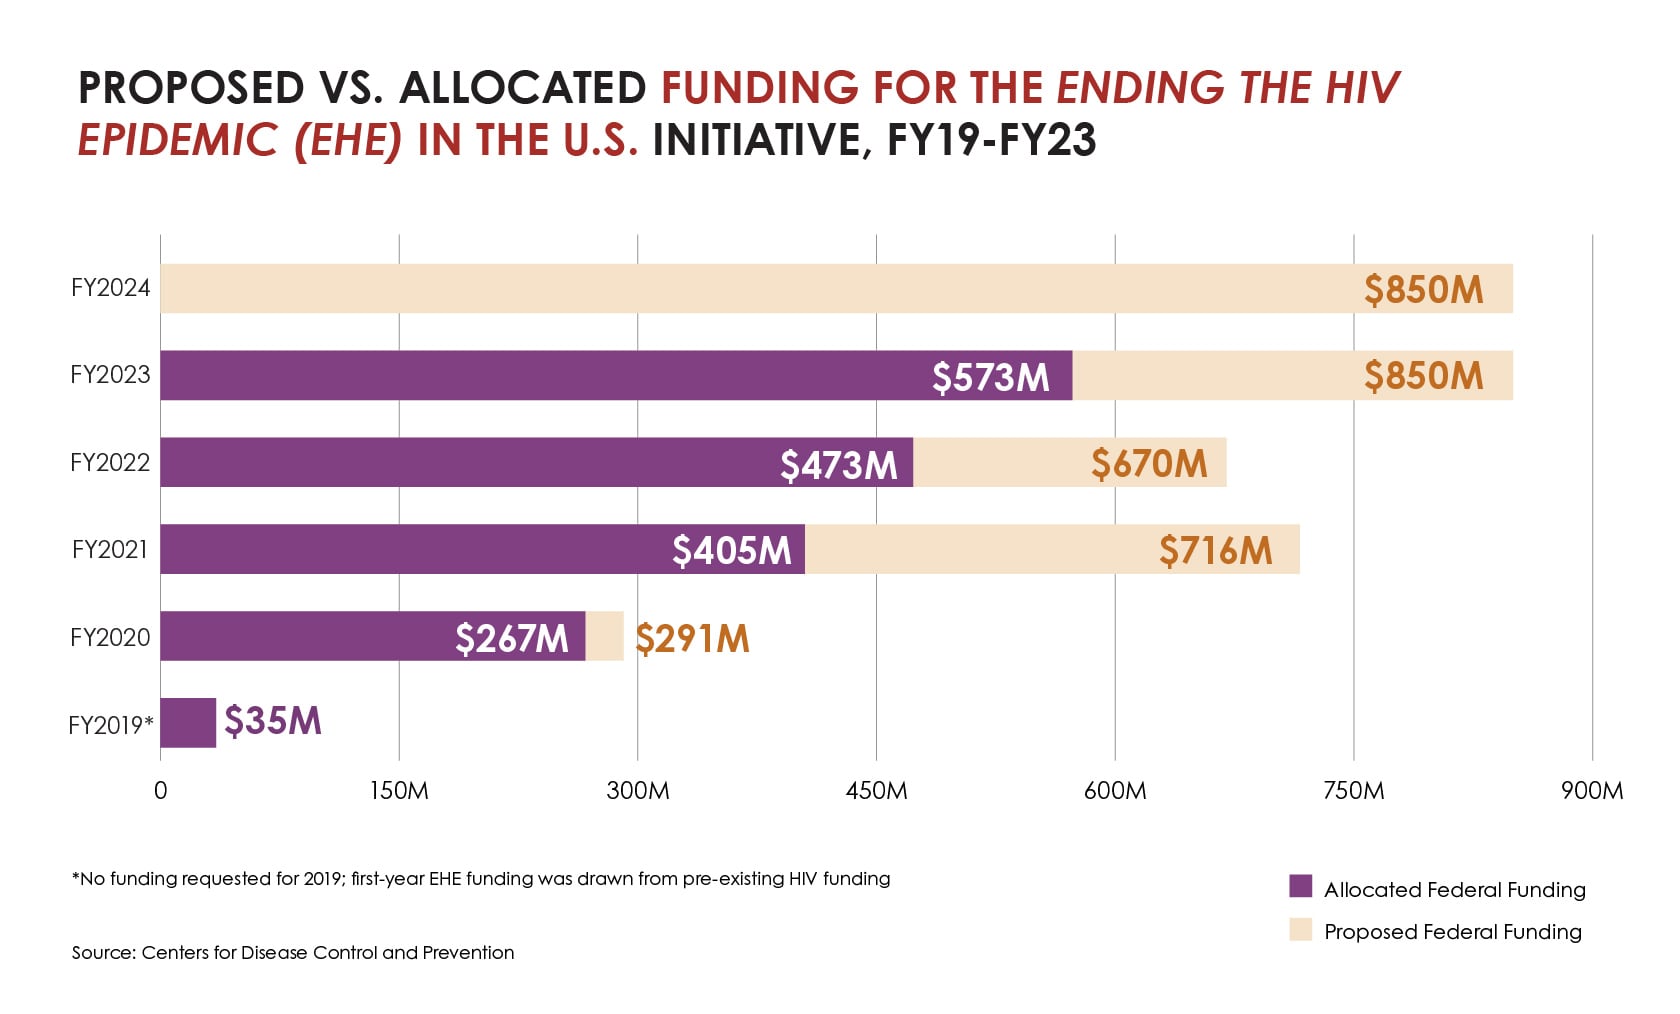 Graphic showing the proposed vs. allocated funding for the ending the HIV Epidemic (EHE) in the U.S. initiative, FY19-FY23